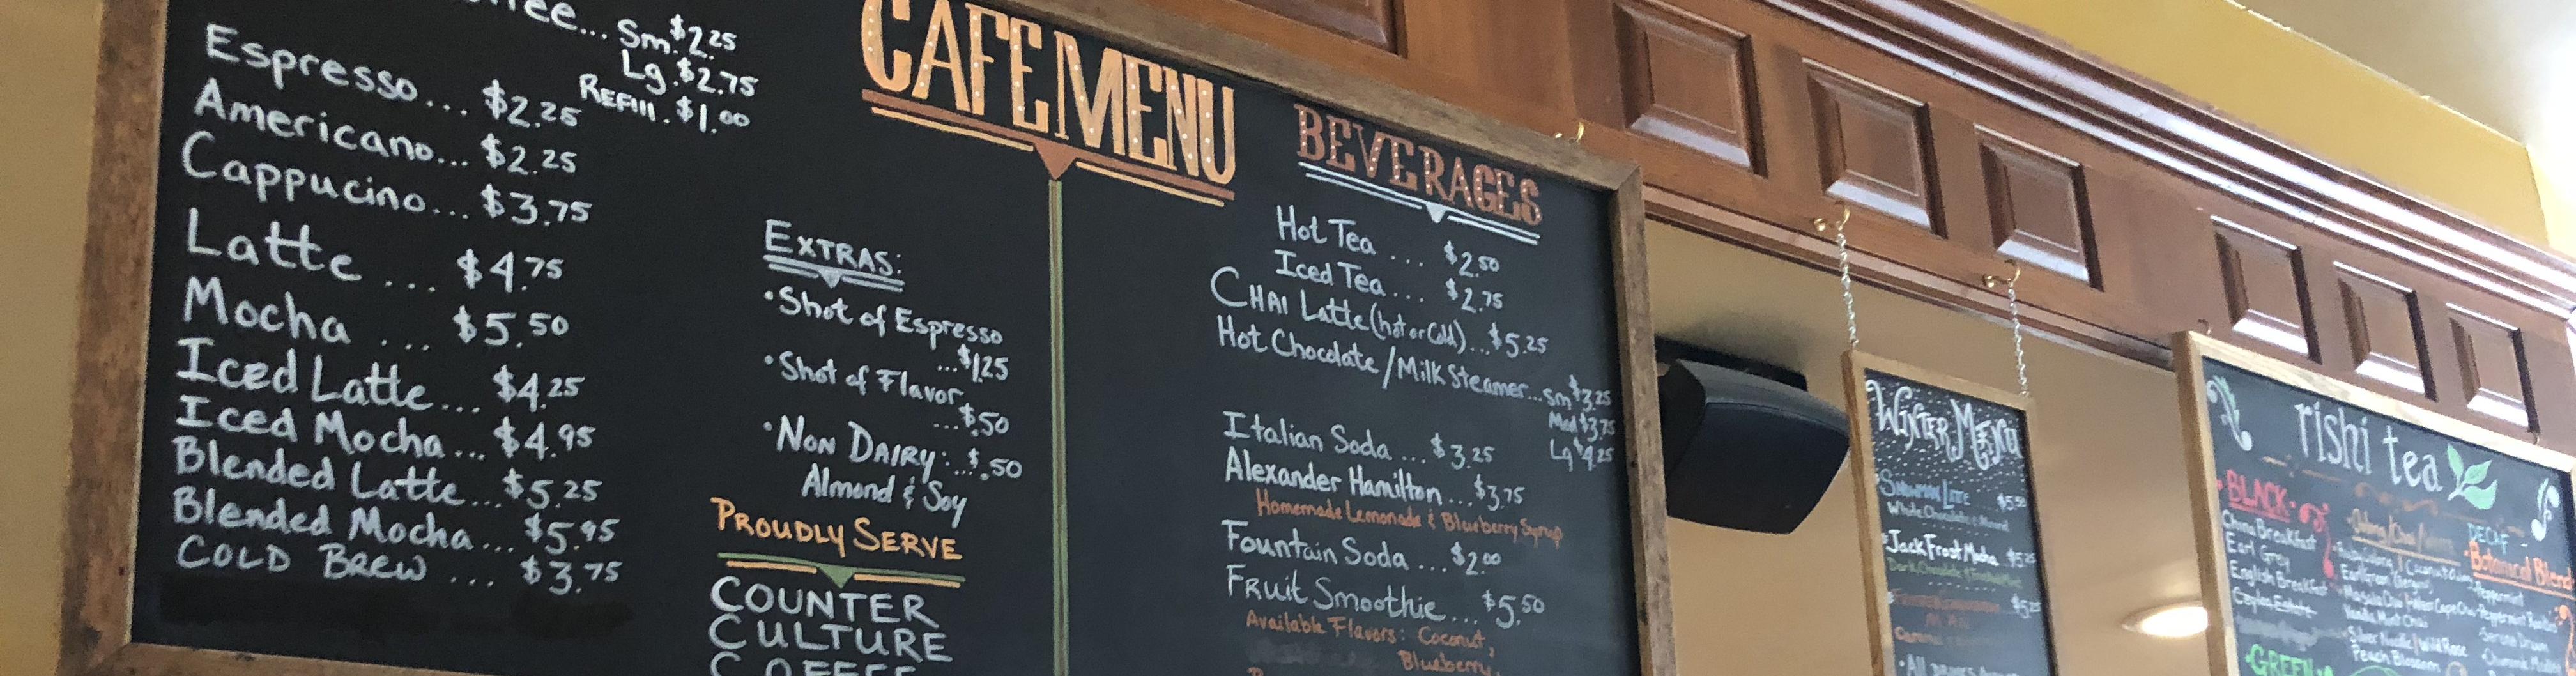 A menu from a cafe.